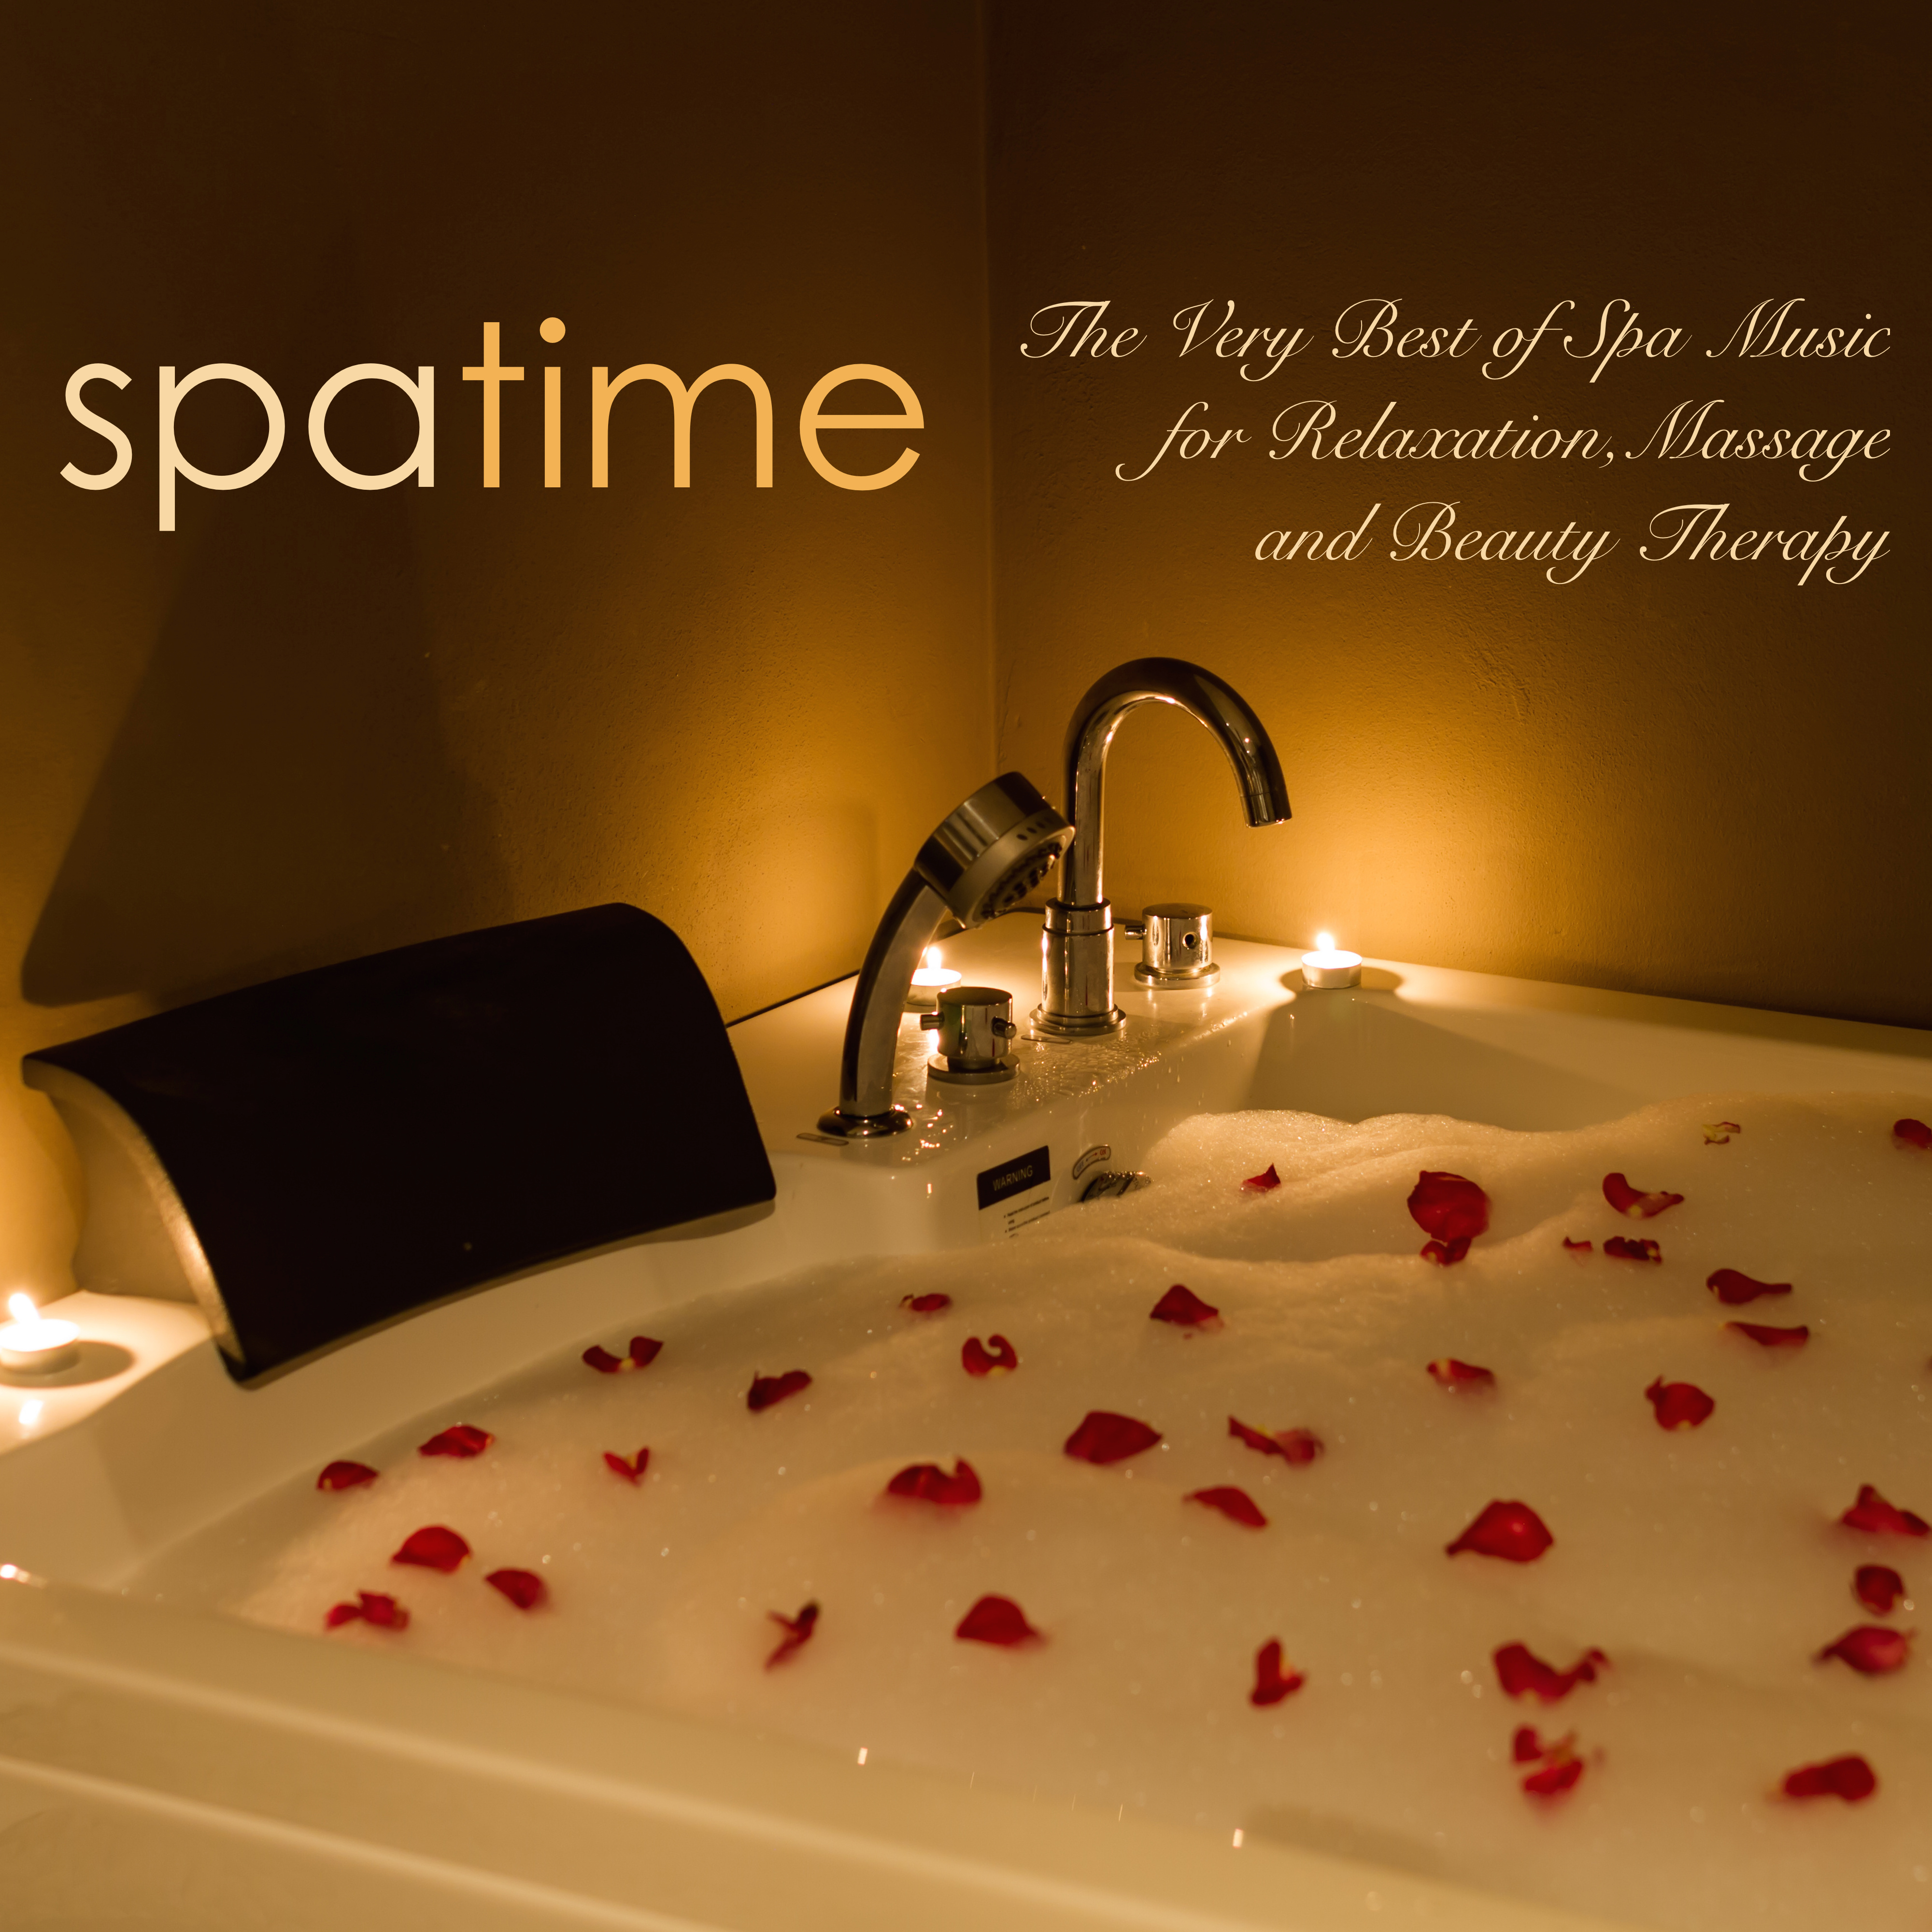 Spa Time - The Very Best of Spa Music for Relaxation, Massage and Beauty Therapy